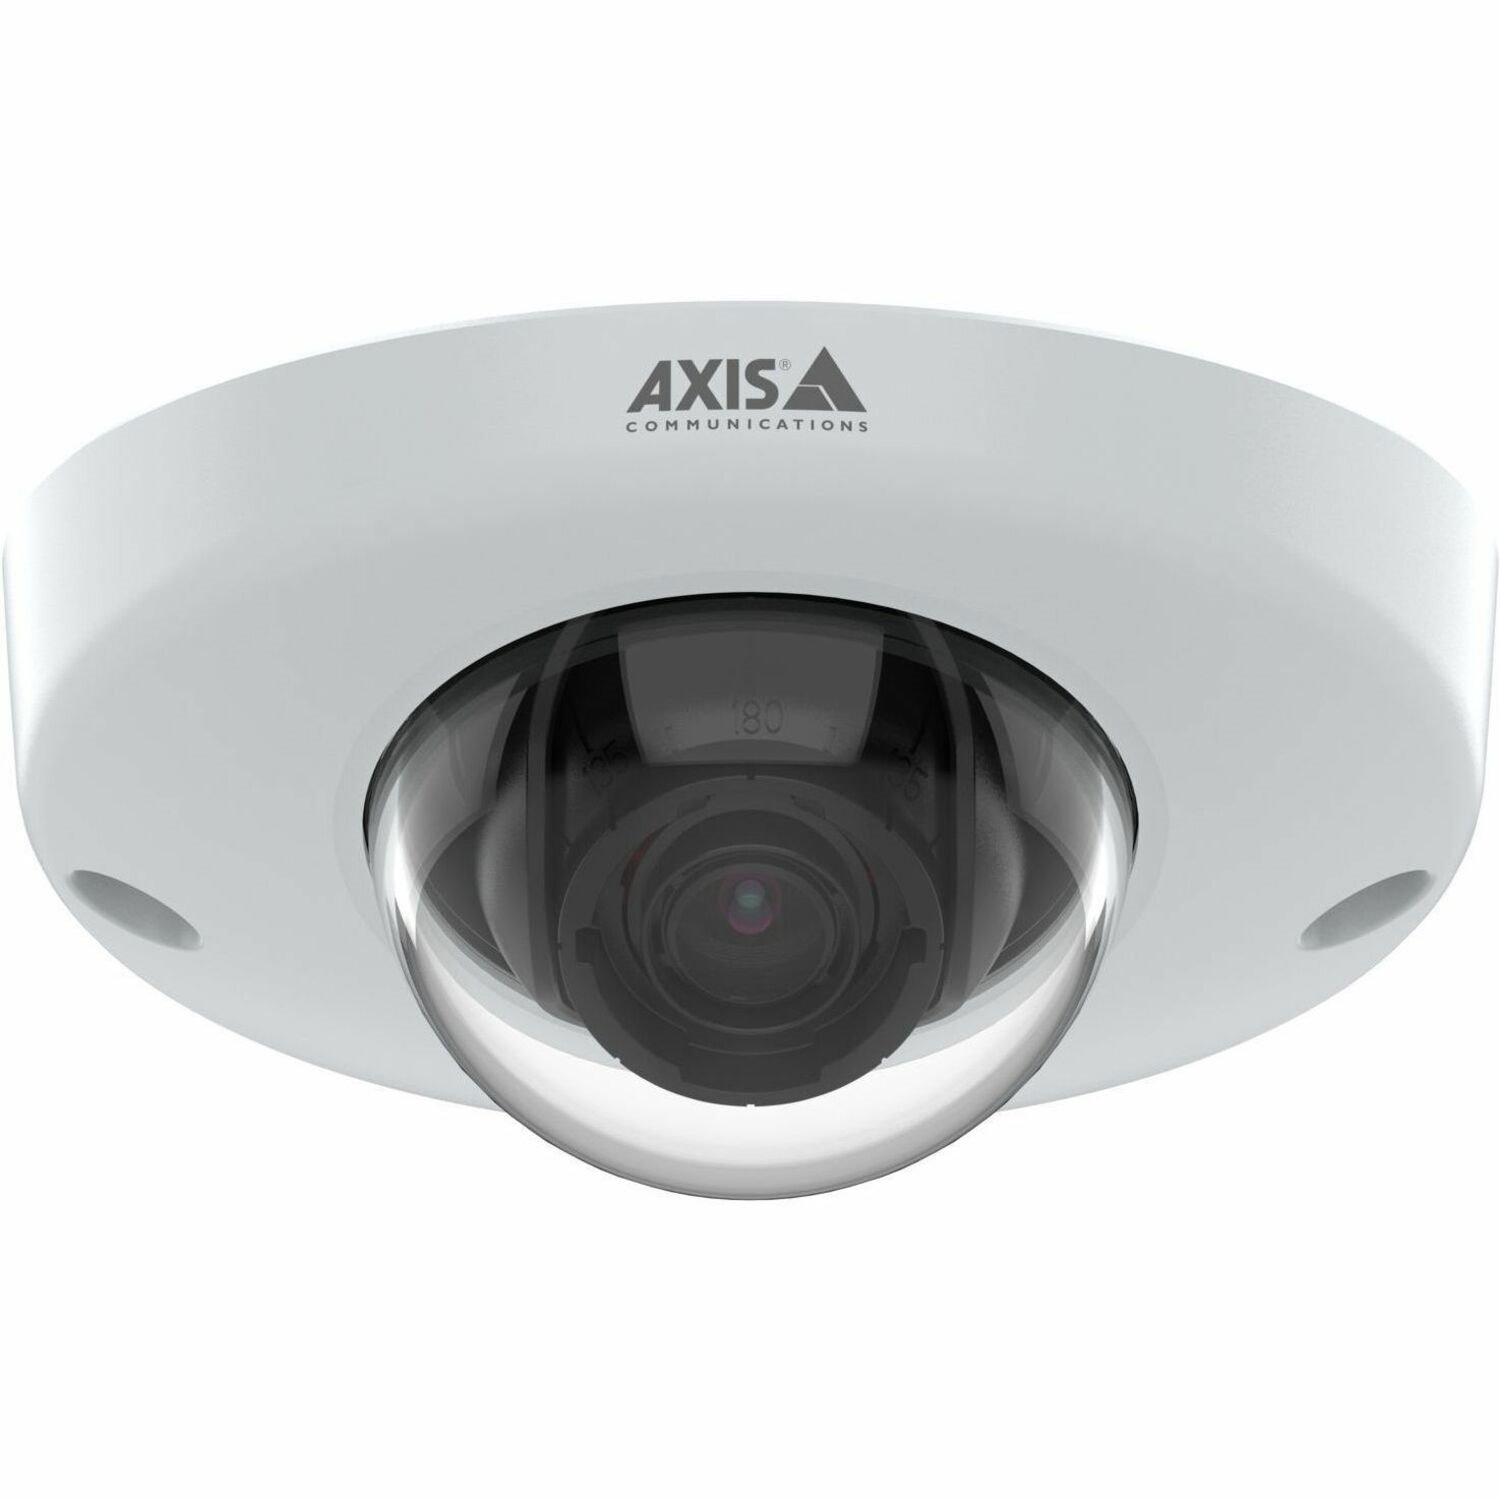 AXIS M3905-R M12 2 Megapixel Full HD Network Camera - Color - 10 Pack - Dome - White - TAA Compliant